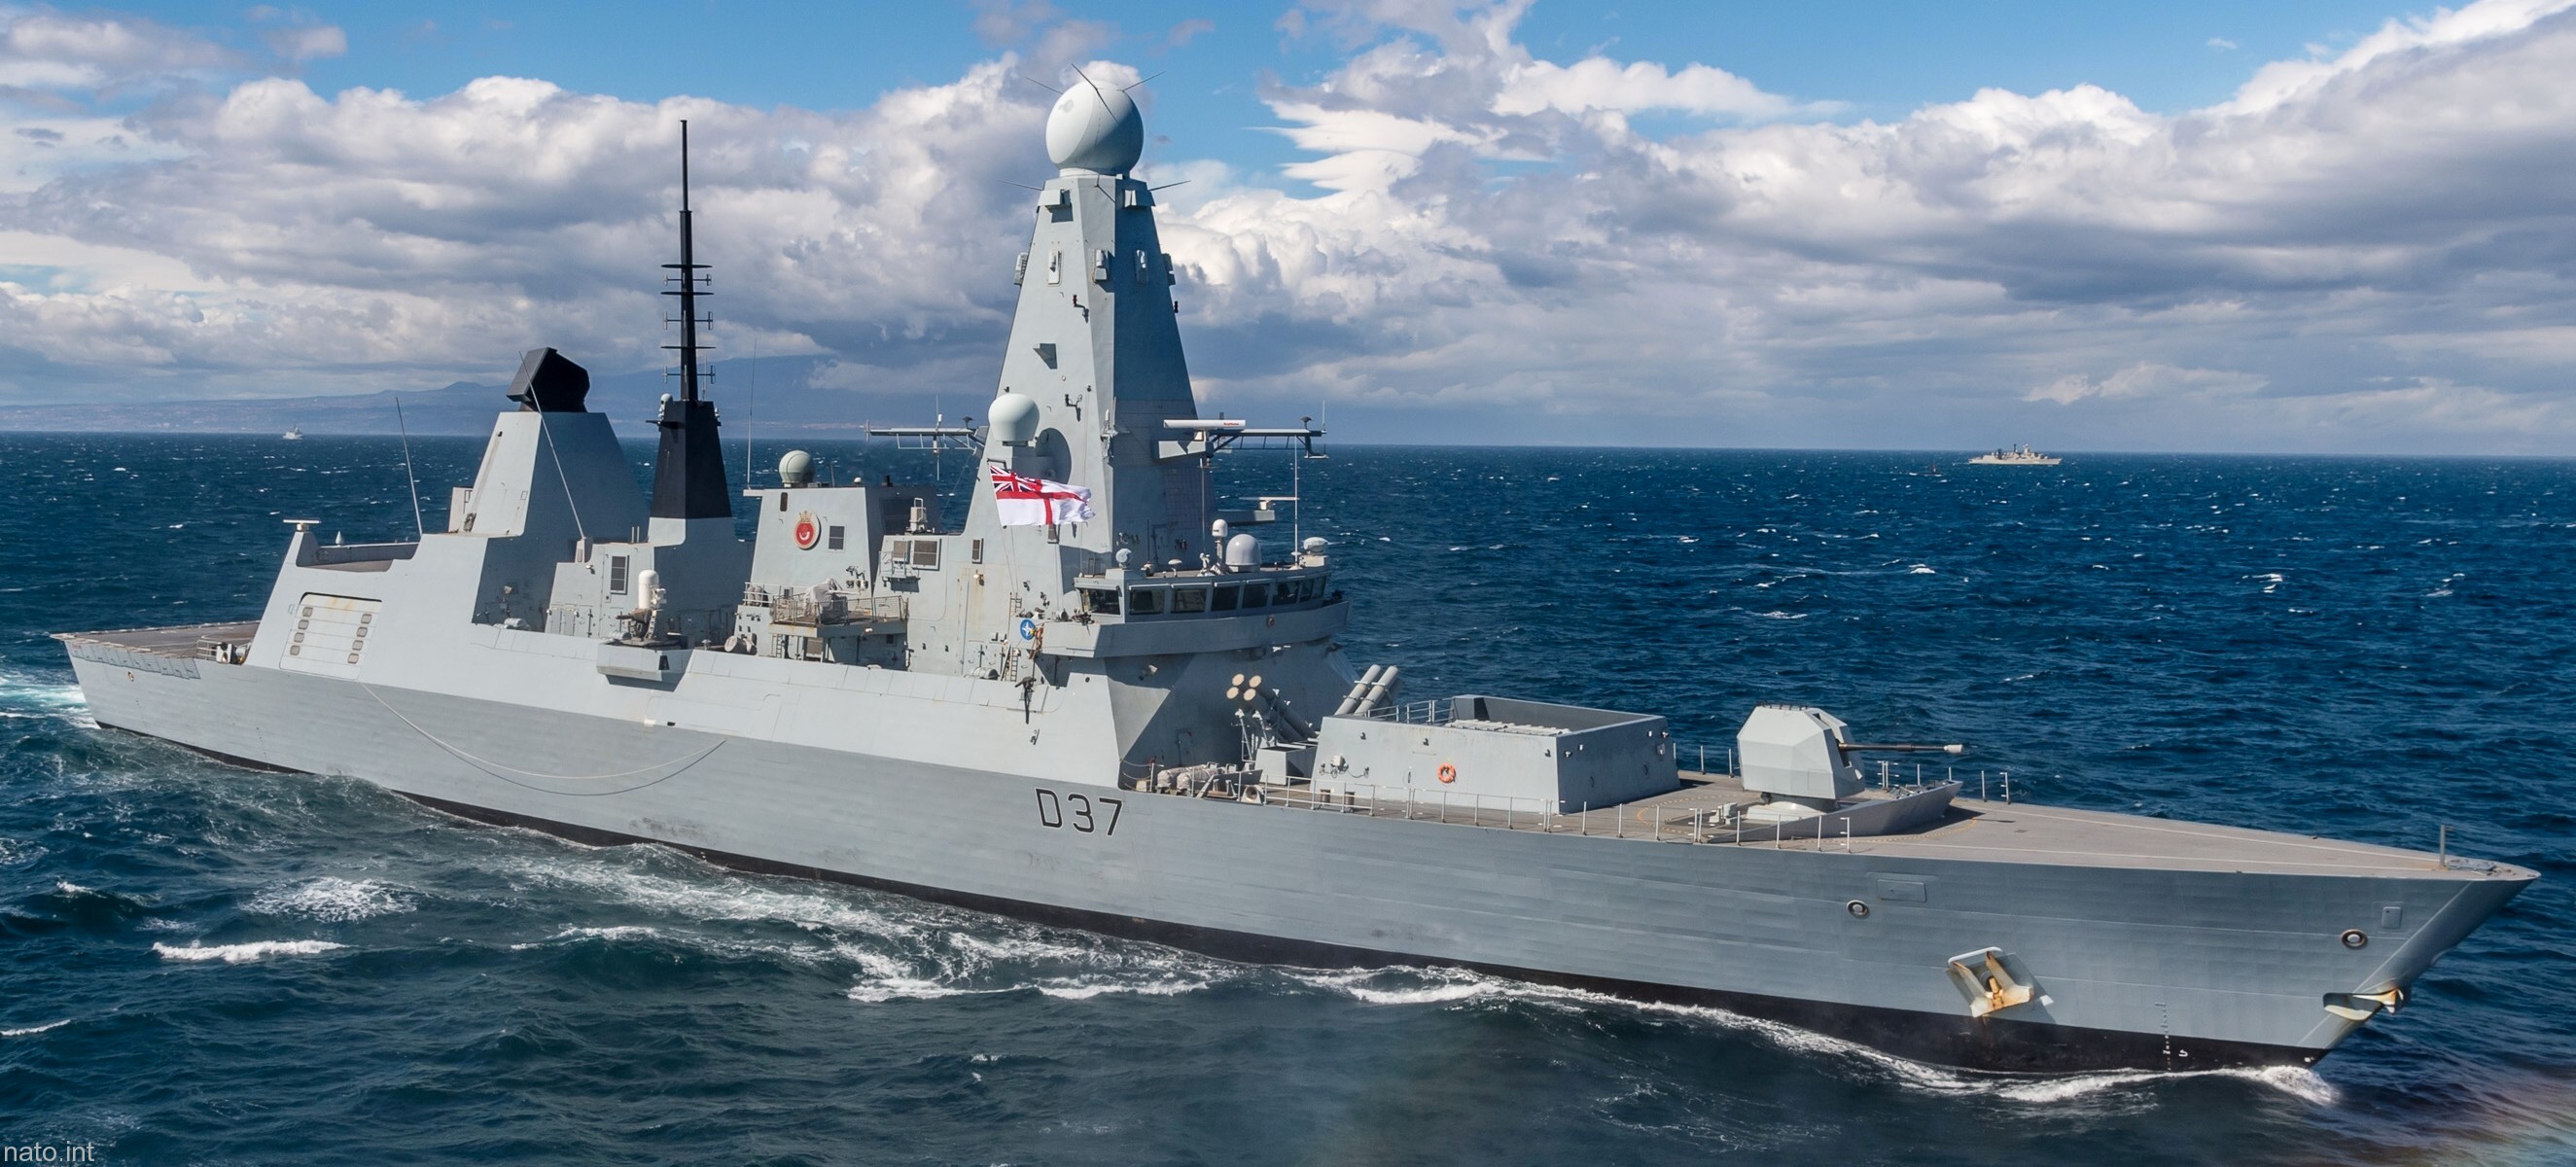 d37 hms duncan d-37 type 45 daring class guided missile destroyer ddg royal navy sea viper 35